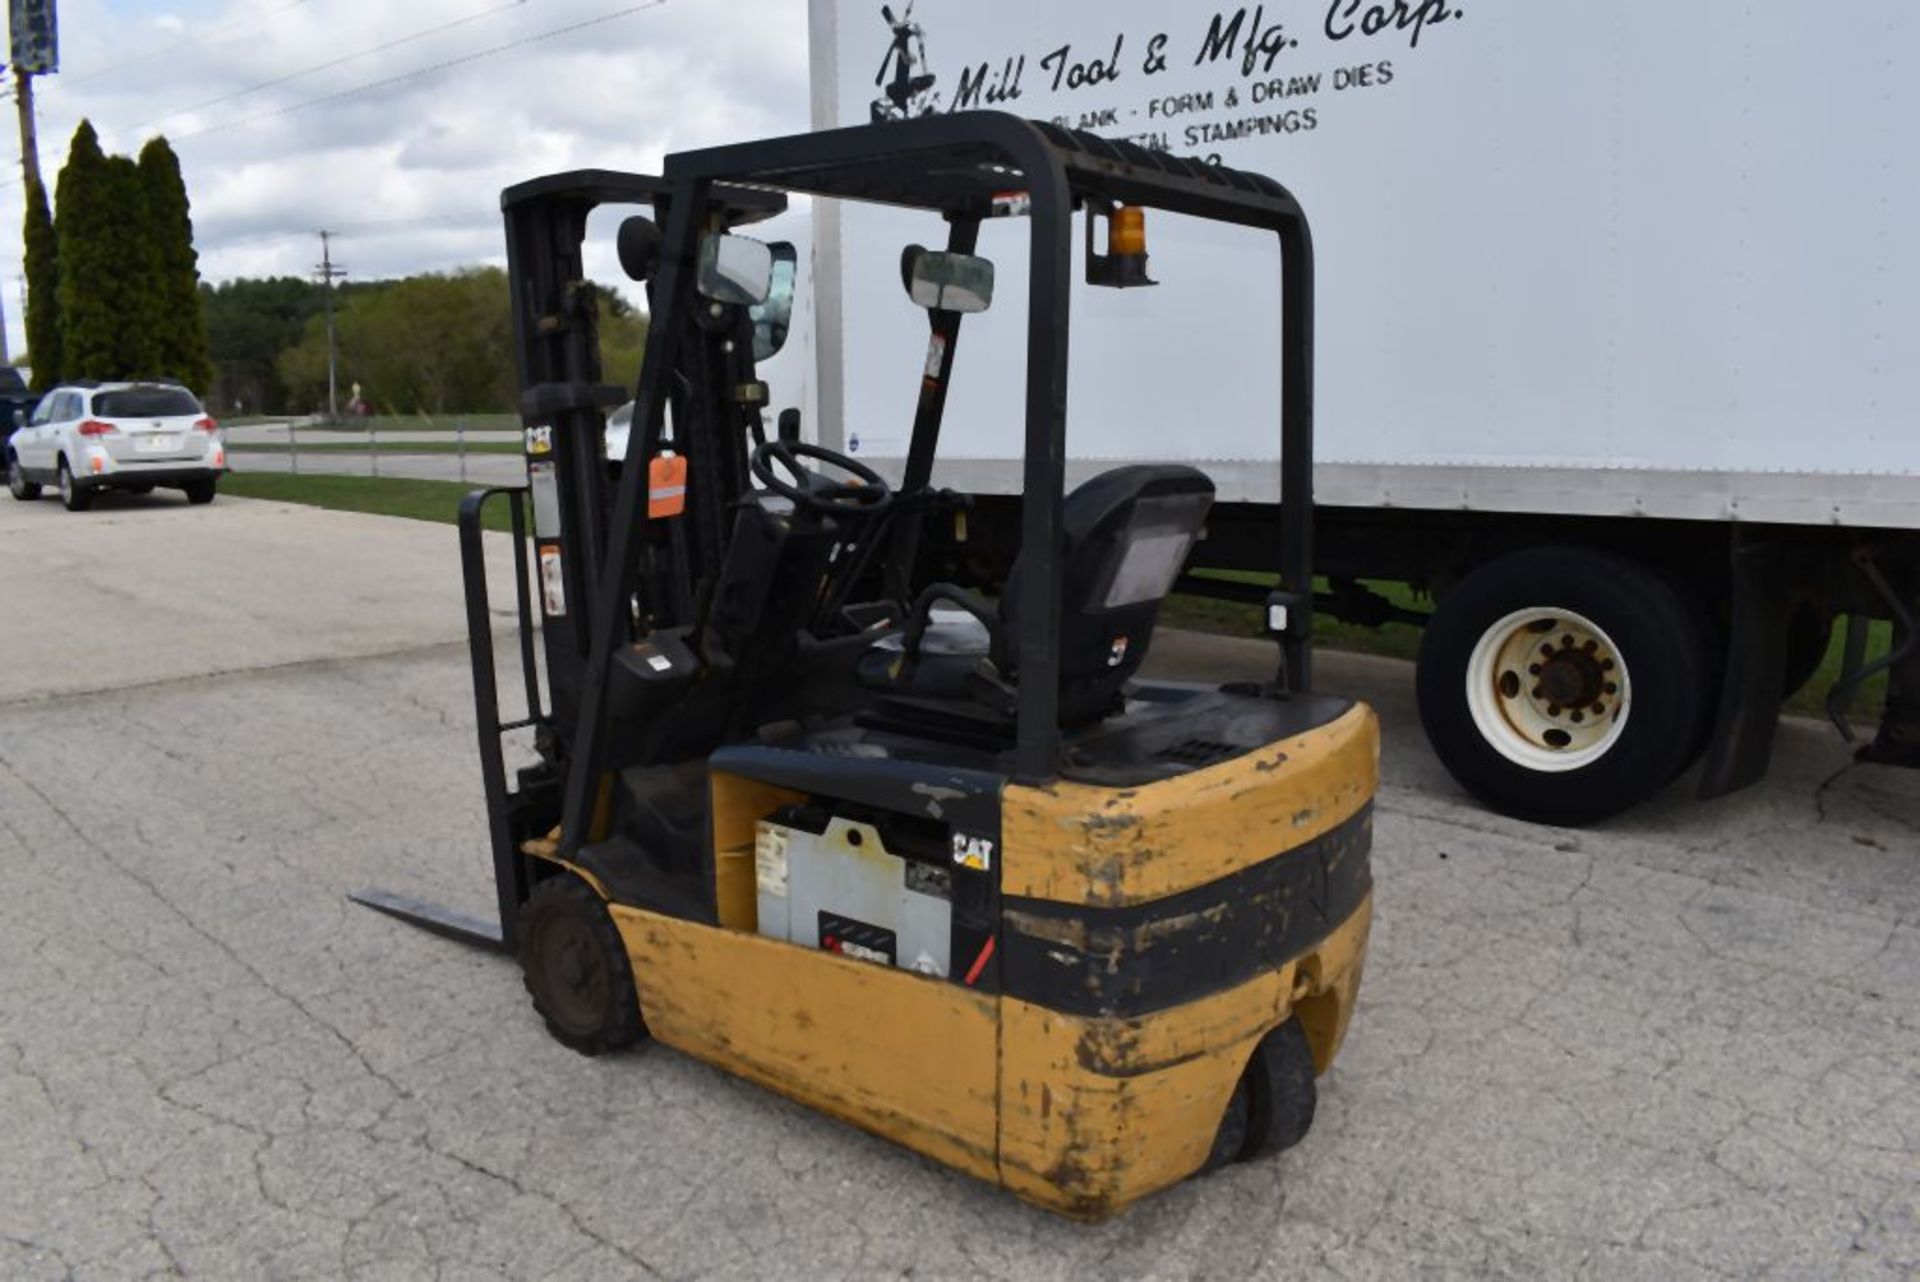 CATERPILLAR RIDE ON FORK TRUCK, MODEL ET3500-AC, S/N: ETB1400111, 36V ELECTRIC TYPE WITH CHARGER, - Image 2 of 8